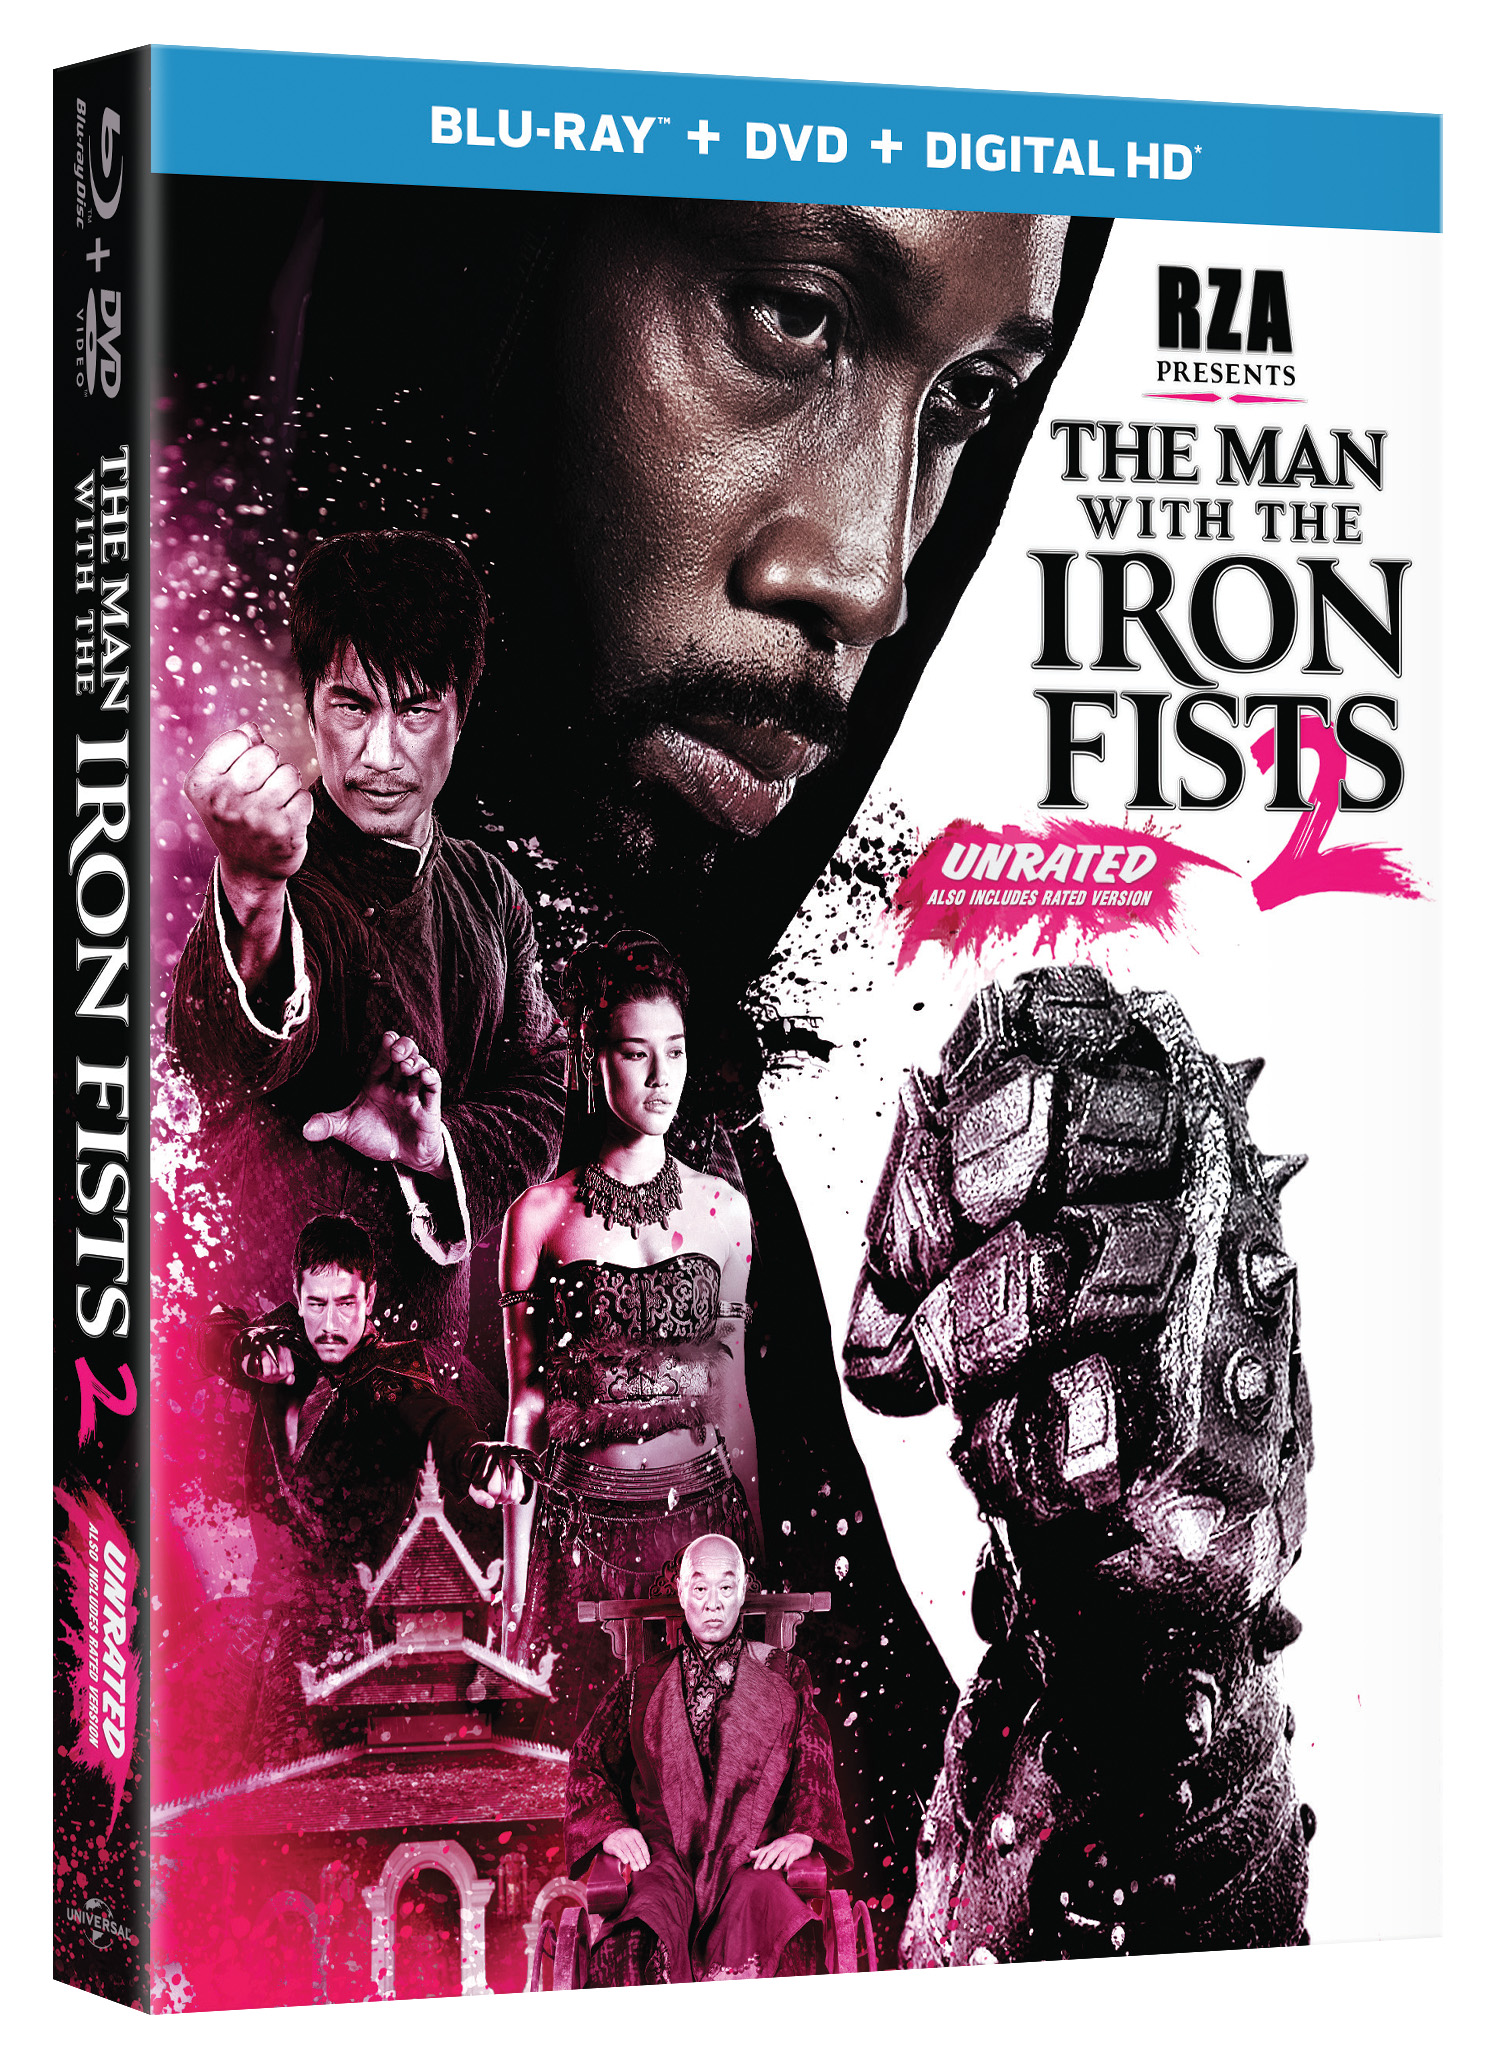 The Man With The Iron The Iron Fist 2 Blu-ray Review